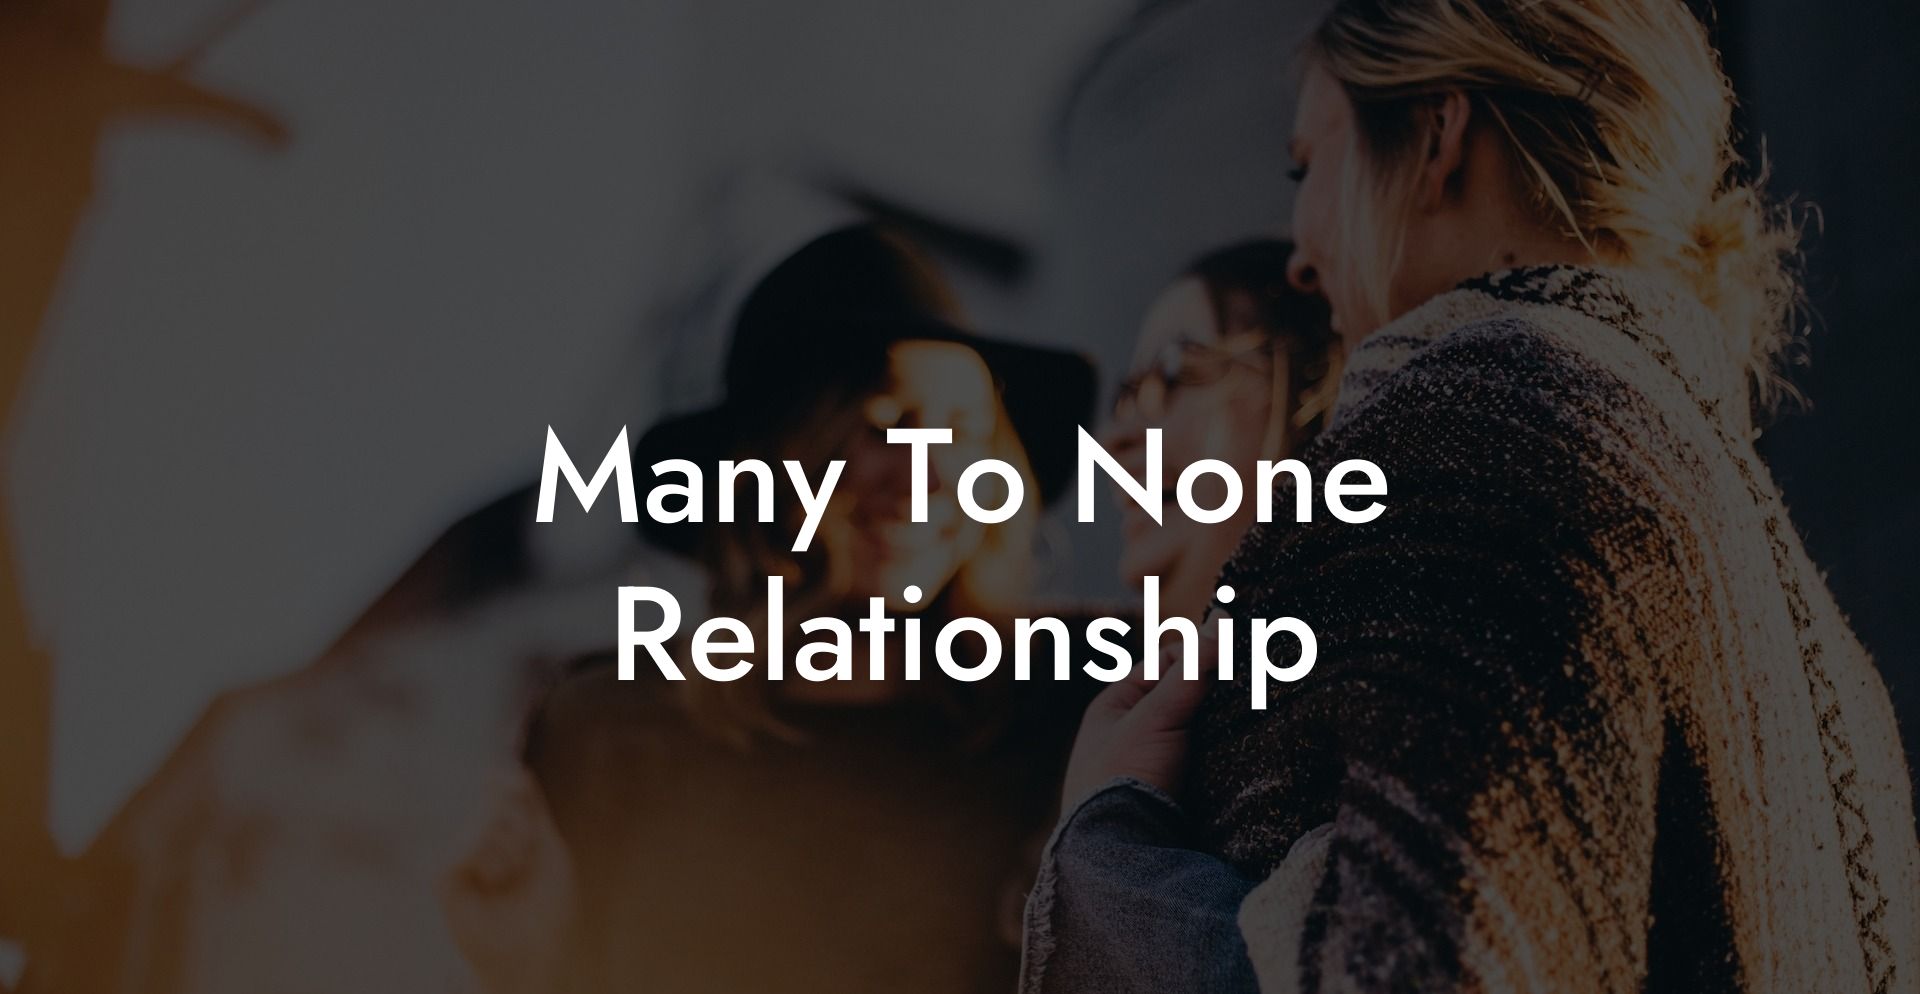 Many To None Relationship